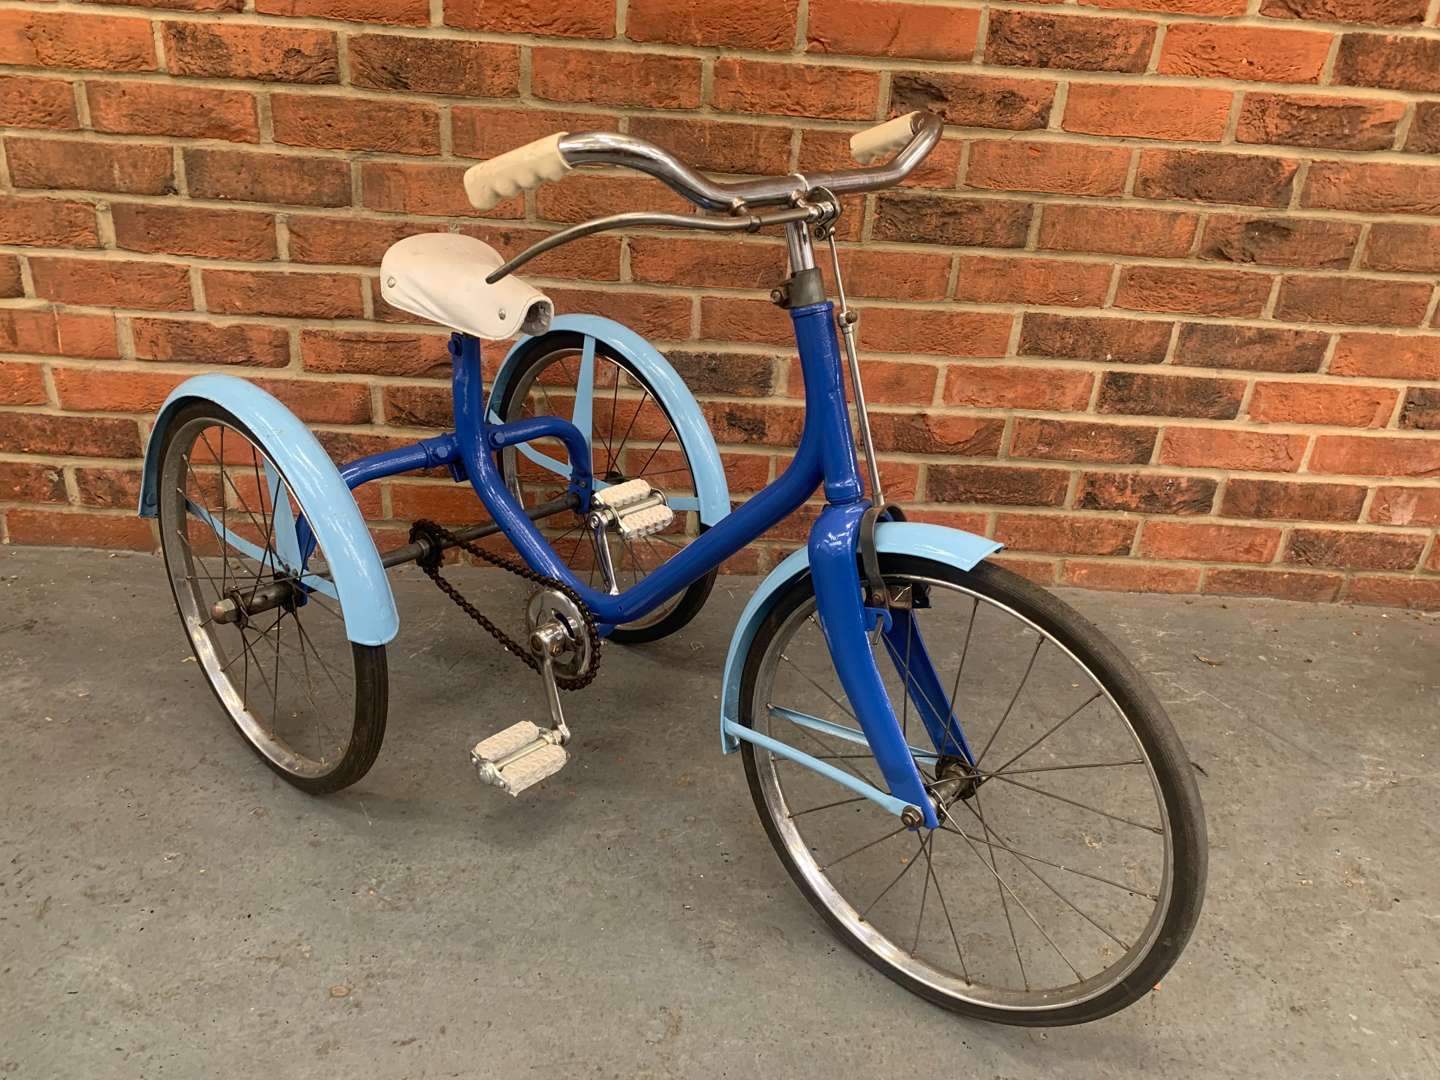 <p>Raleigh Lion Child's Tricycle&nbsp;</p>